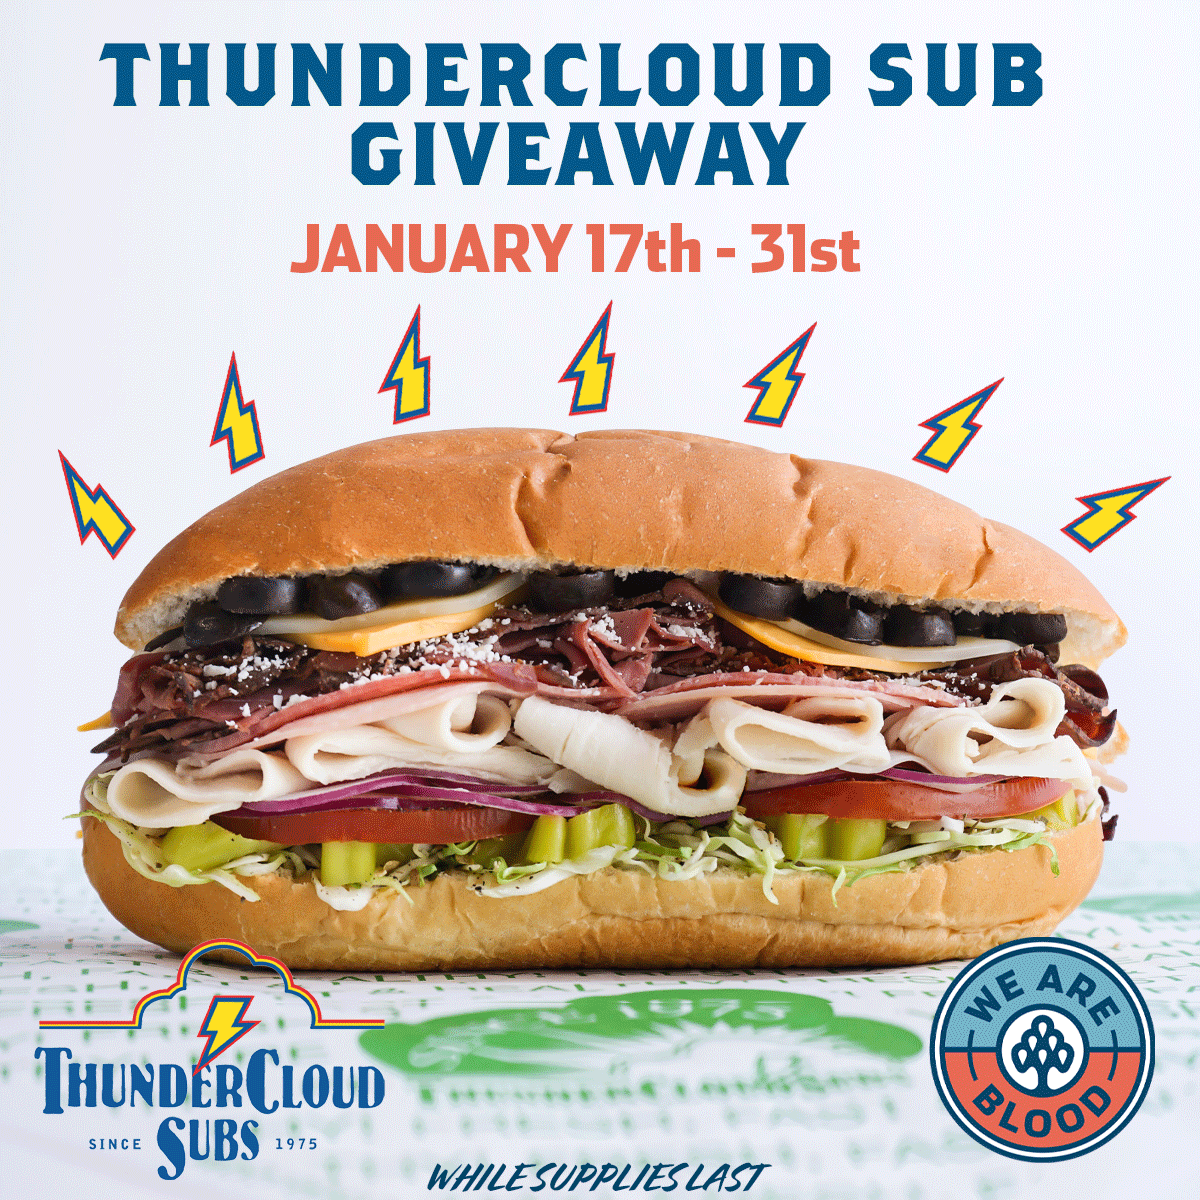 Donate Blood at We Are Blood, Get a Free Sub from Thundercloud